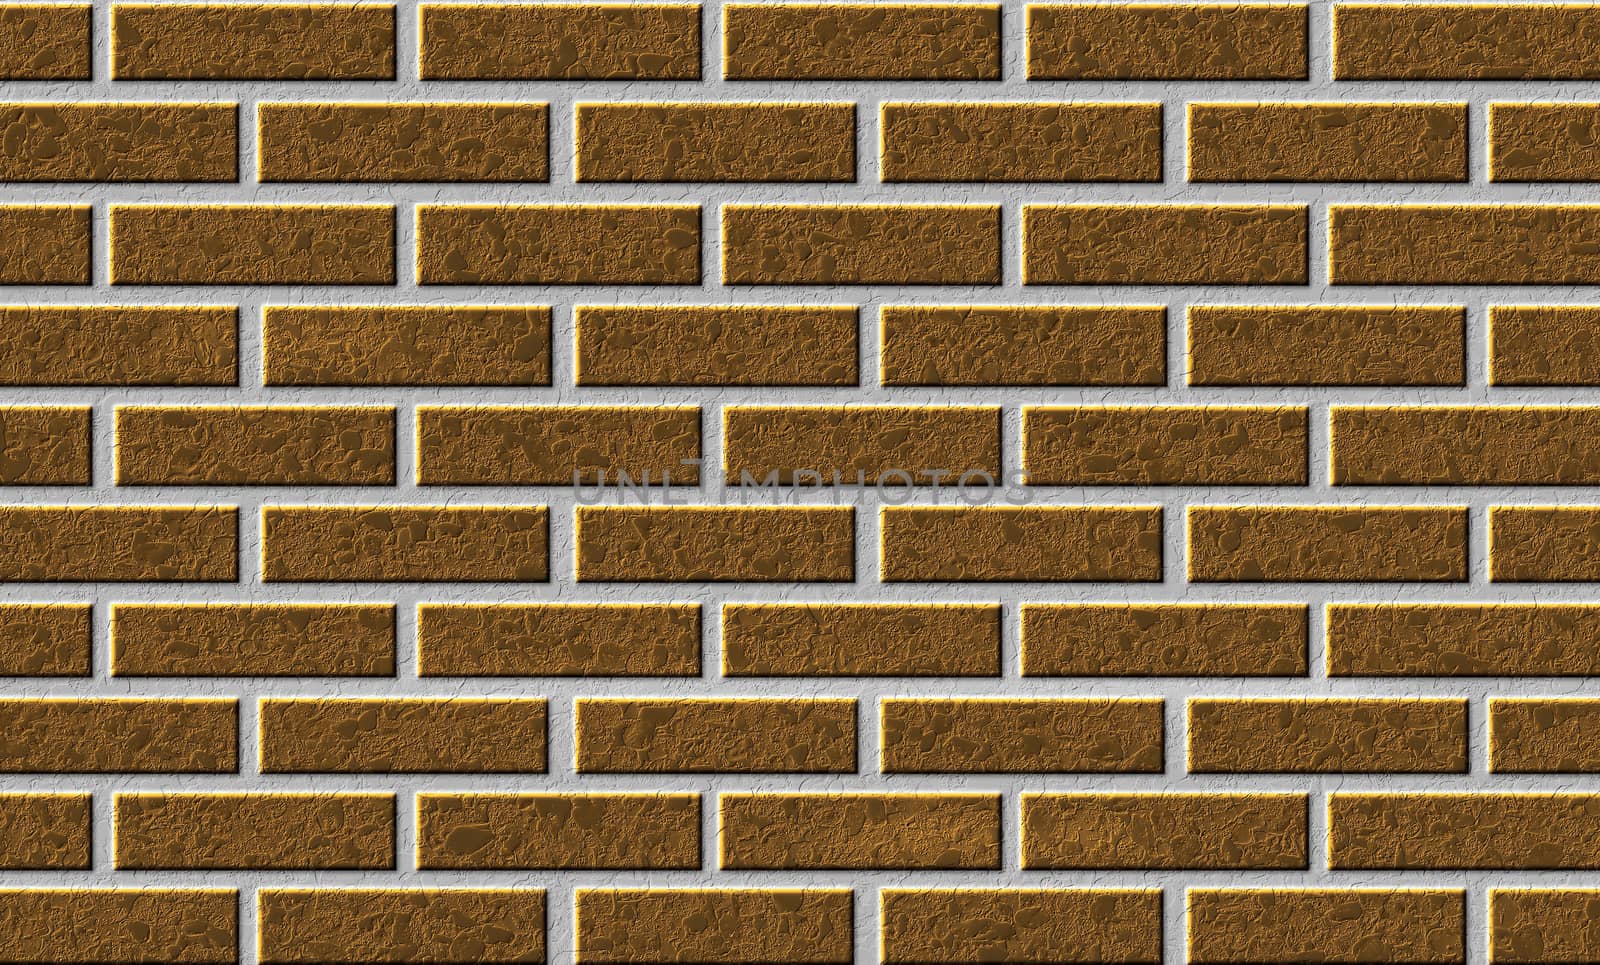 Brick wall illustration. Golden textured background. Pattern of decorative wall surface